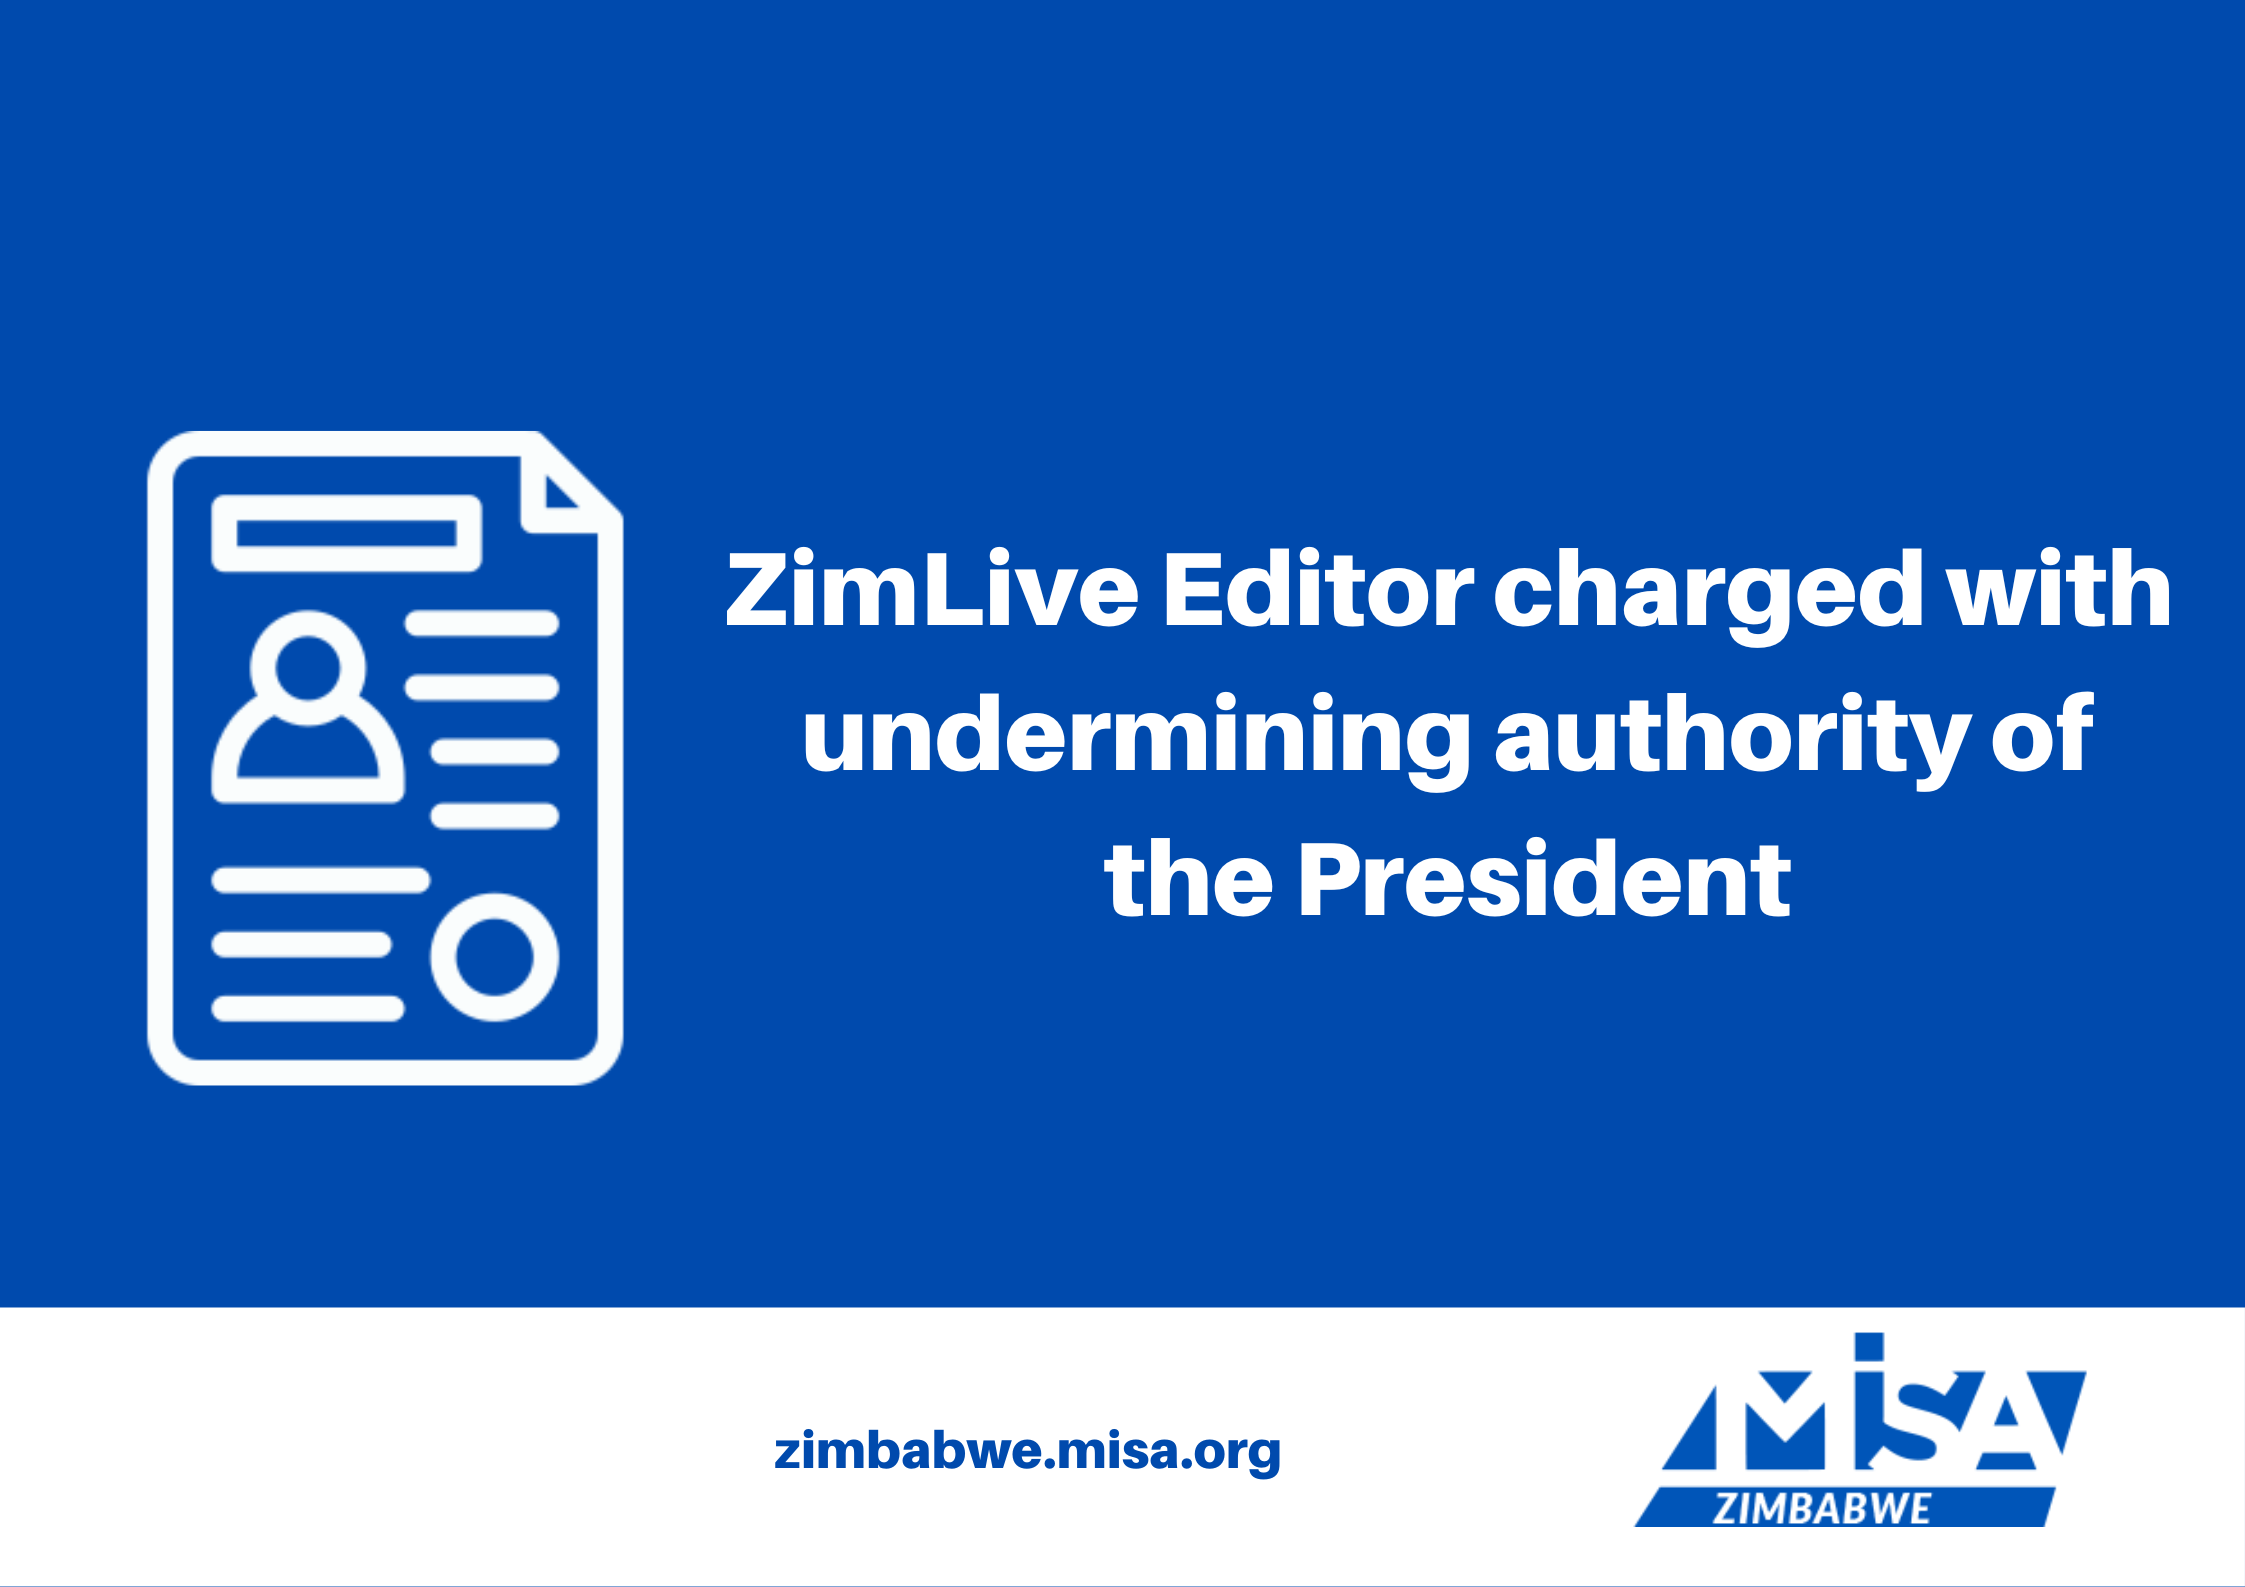 ZimLive Editor charged with undermining authority of the President